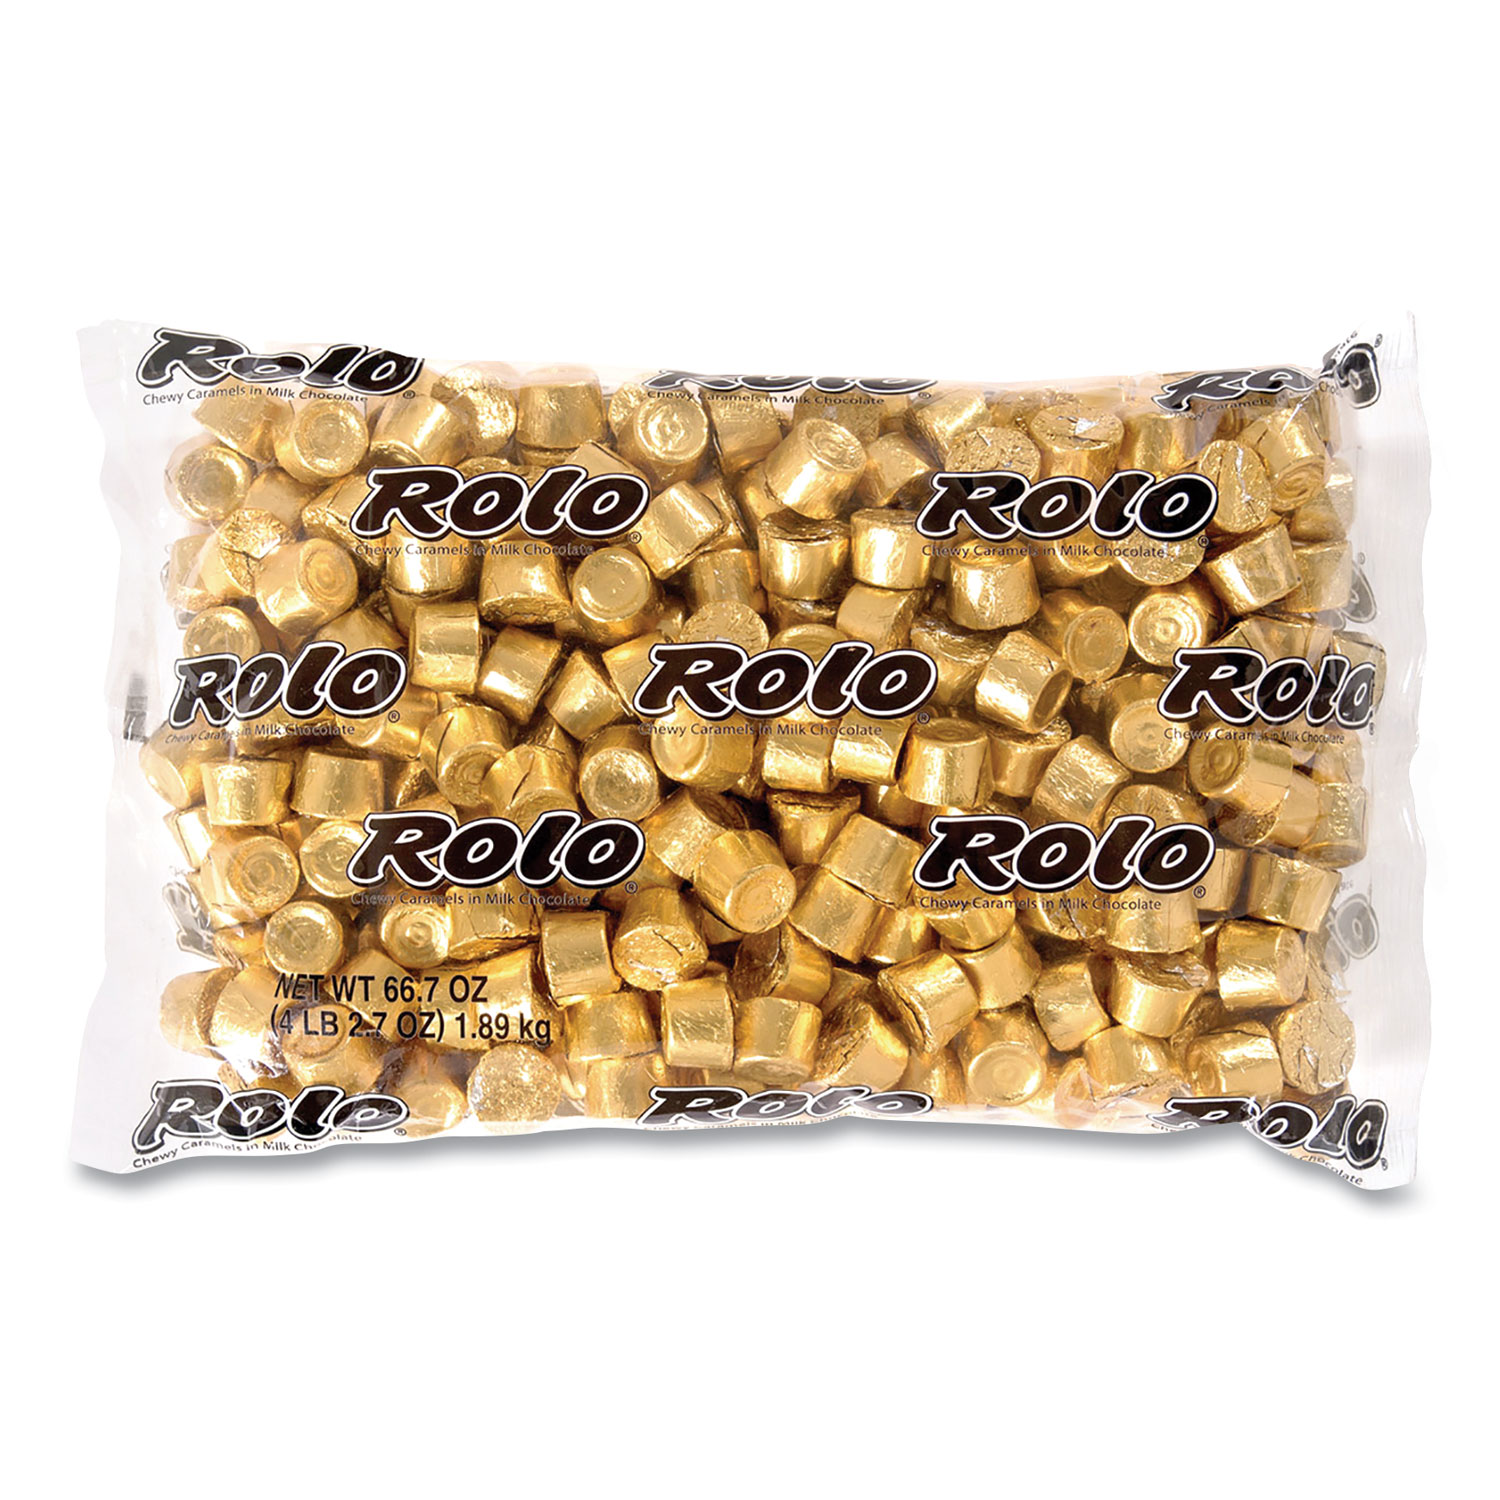  ROLO 37855 Bulk Pack Creamy Caramels Wrapped in Rich Chocolate Candy, 66.7 oz Bag, Free Delivery in 1-4 Business Days (GRR24600058) 